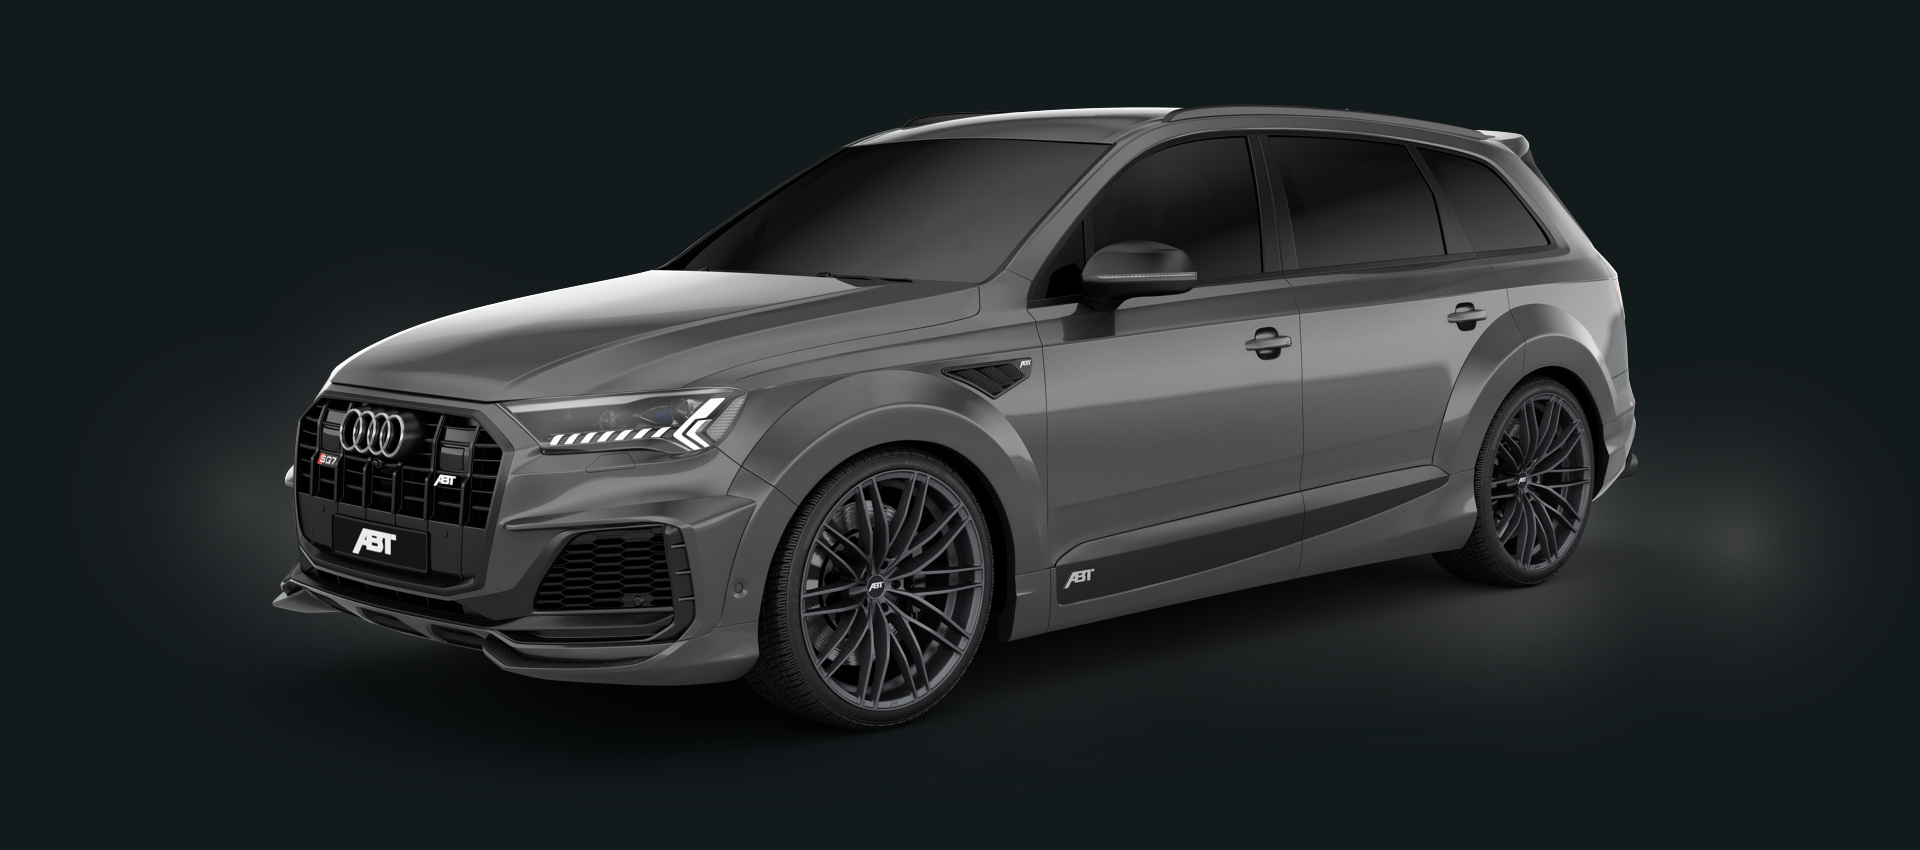 ABT Body Kit for Audi A1 GB one of one edition Buy with delivery